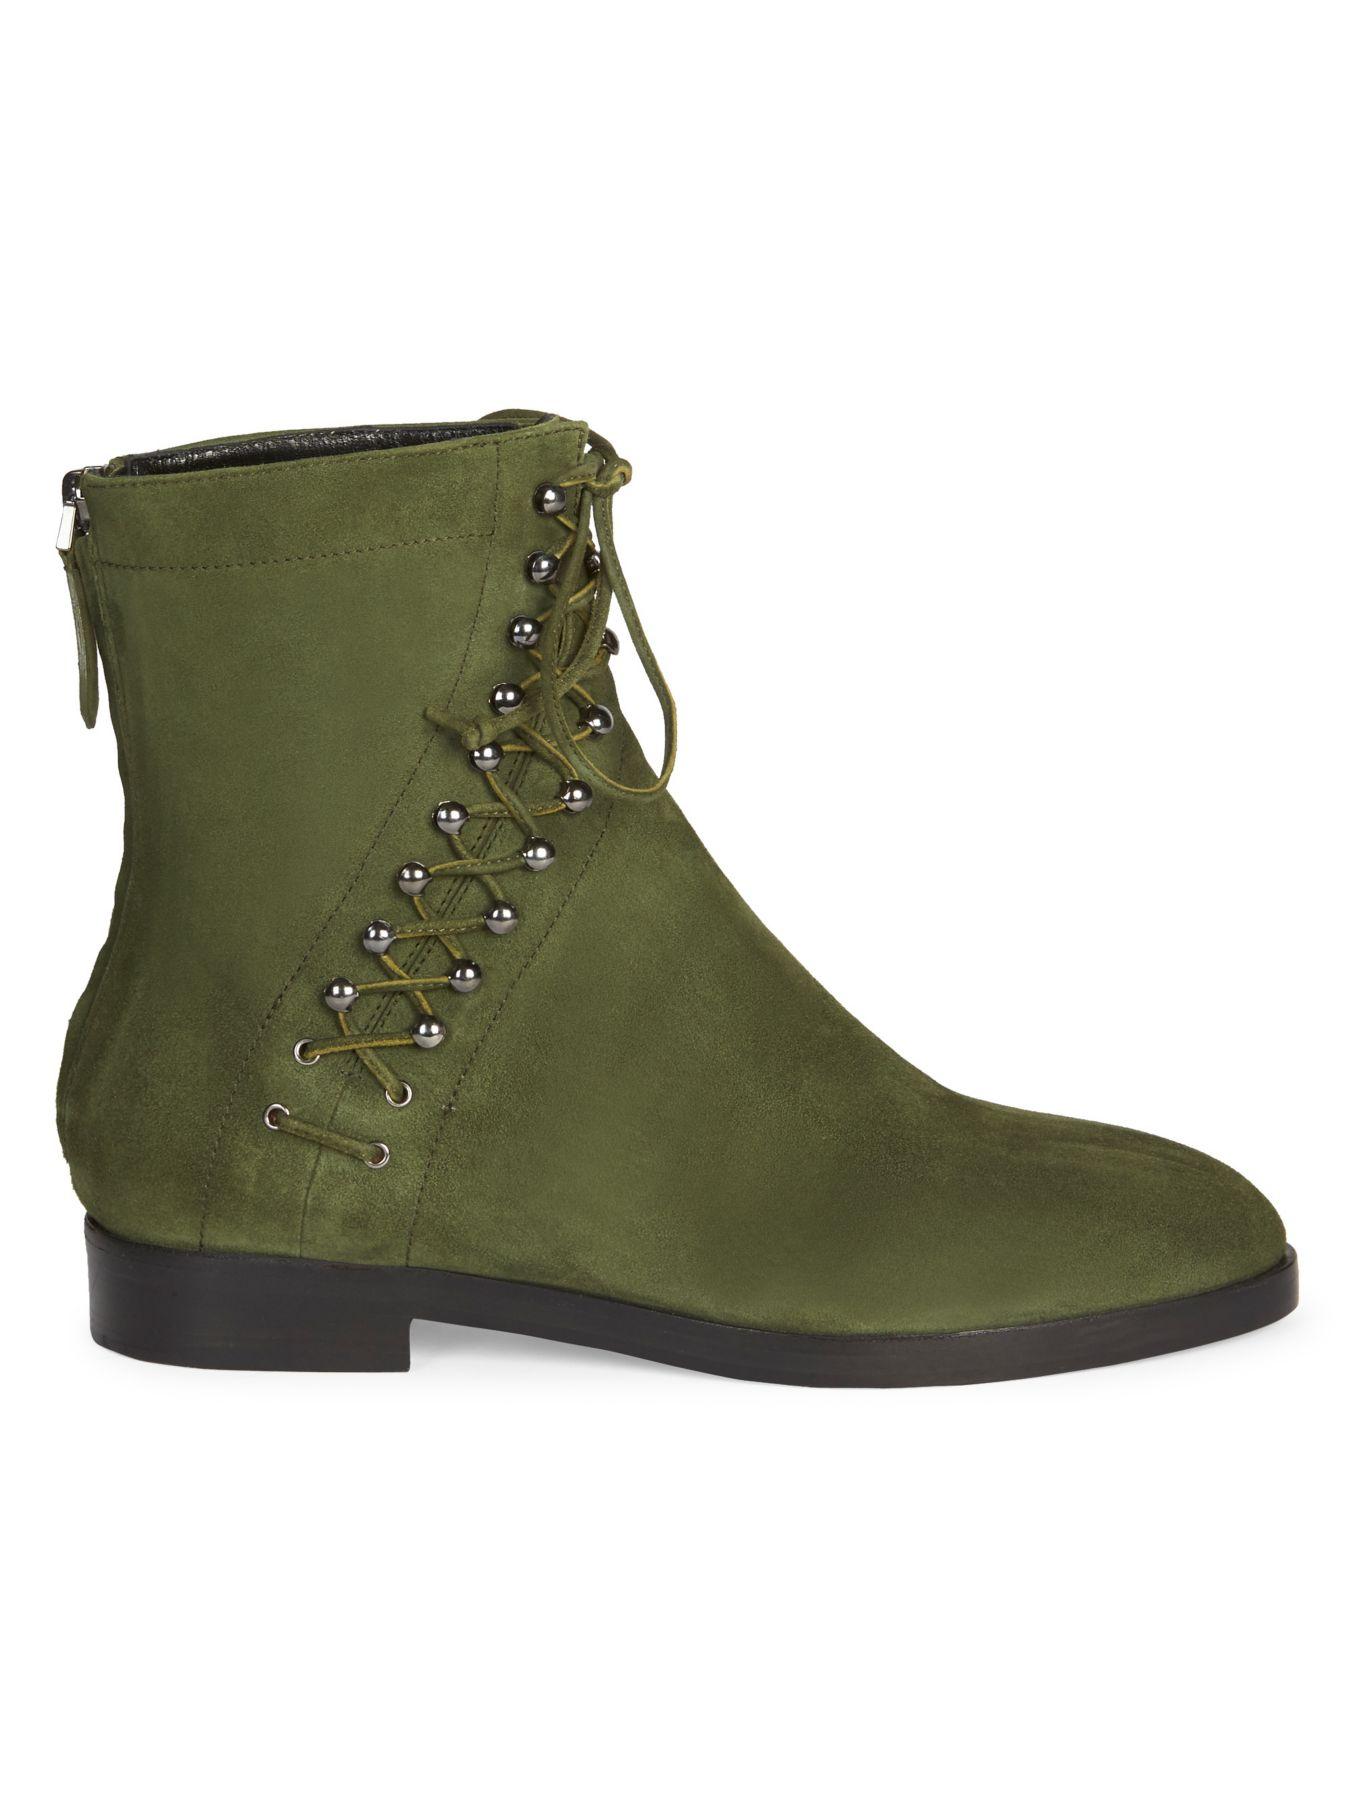 Alaïa Suede Lace-up Booties in Green - Lyst